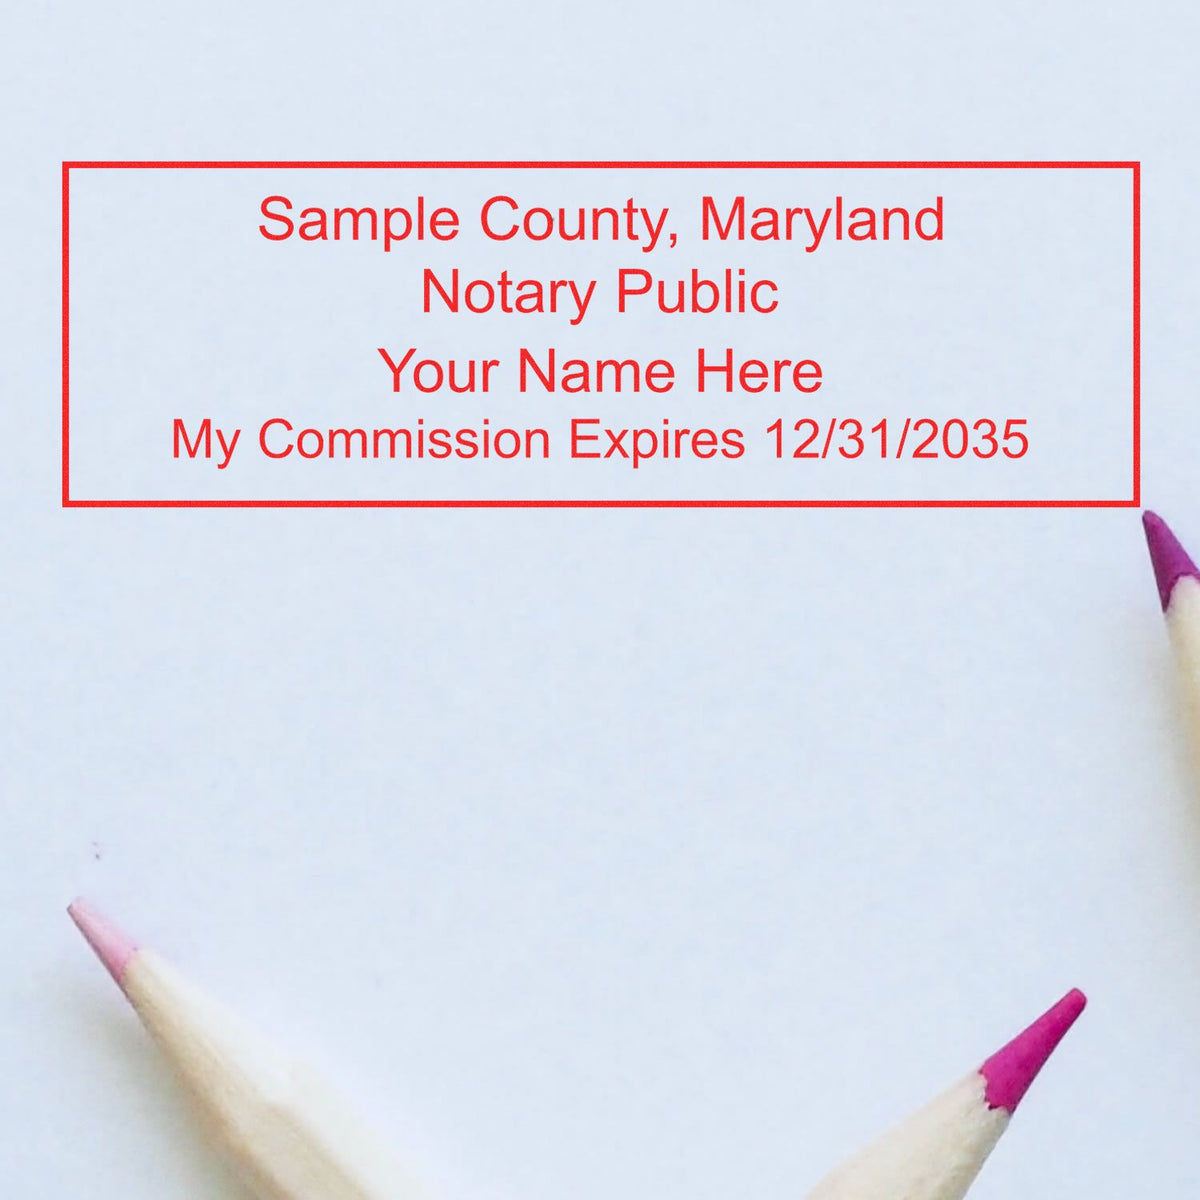 The Heavy-Duty Maryland Rectangular Notary Stamp stamp impression comes to life with a crisp, detailed photo on paper - showcasing true professional quality.